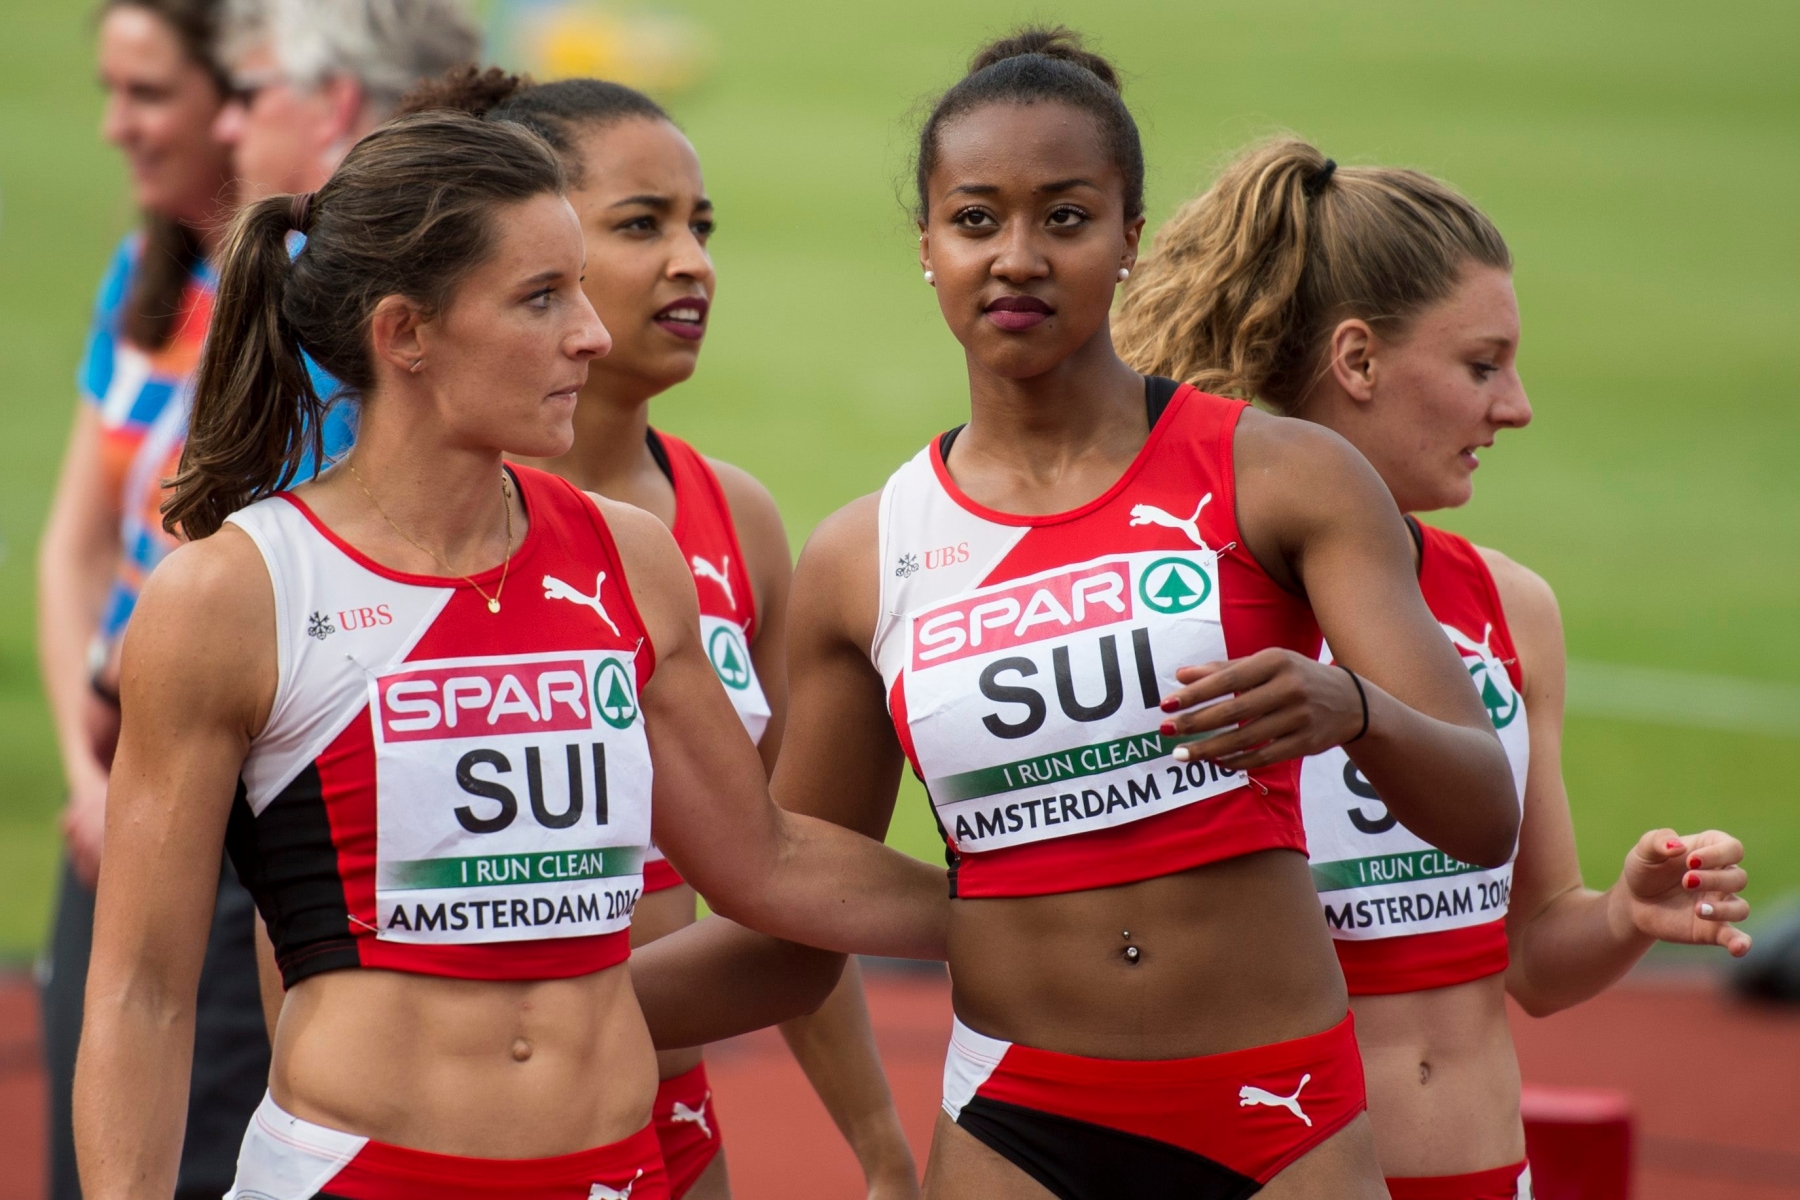 Swiss athletes Ellen Sprunger, Salome Kora, Sarah Atcho and Ajla Del Ponte, from left to right, reacts after the 4x100m relay of the women at the 2016 European Athletics Championships in Amsterdam, Netherlands, Sunday, 10 July 2016. The 2016 European Athletics Championships will be held in Amsterdam, Netherlands, from 06 until 10 July 2016. (KEYSTONE/Ennio Leanza) LEICHTATHLETIK EM 2016 AMSTERDAM